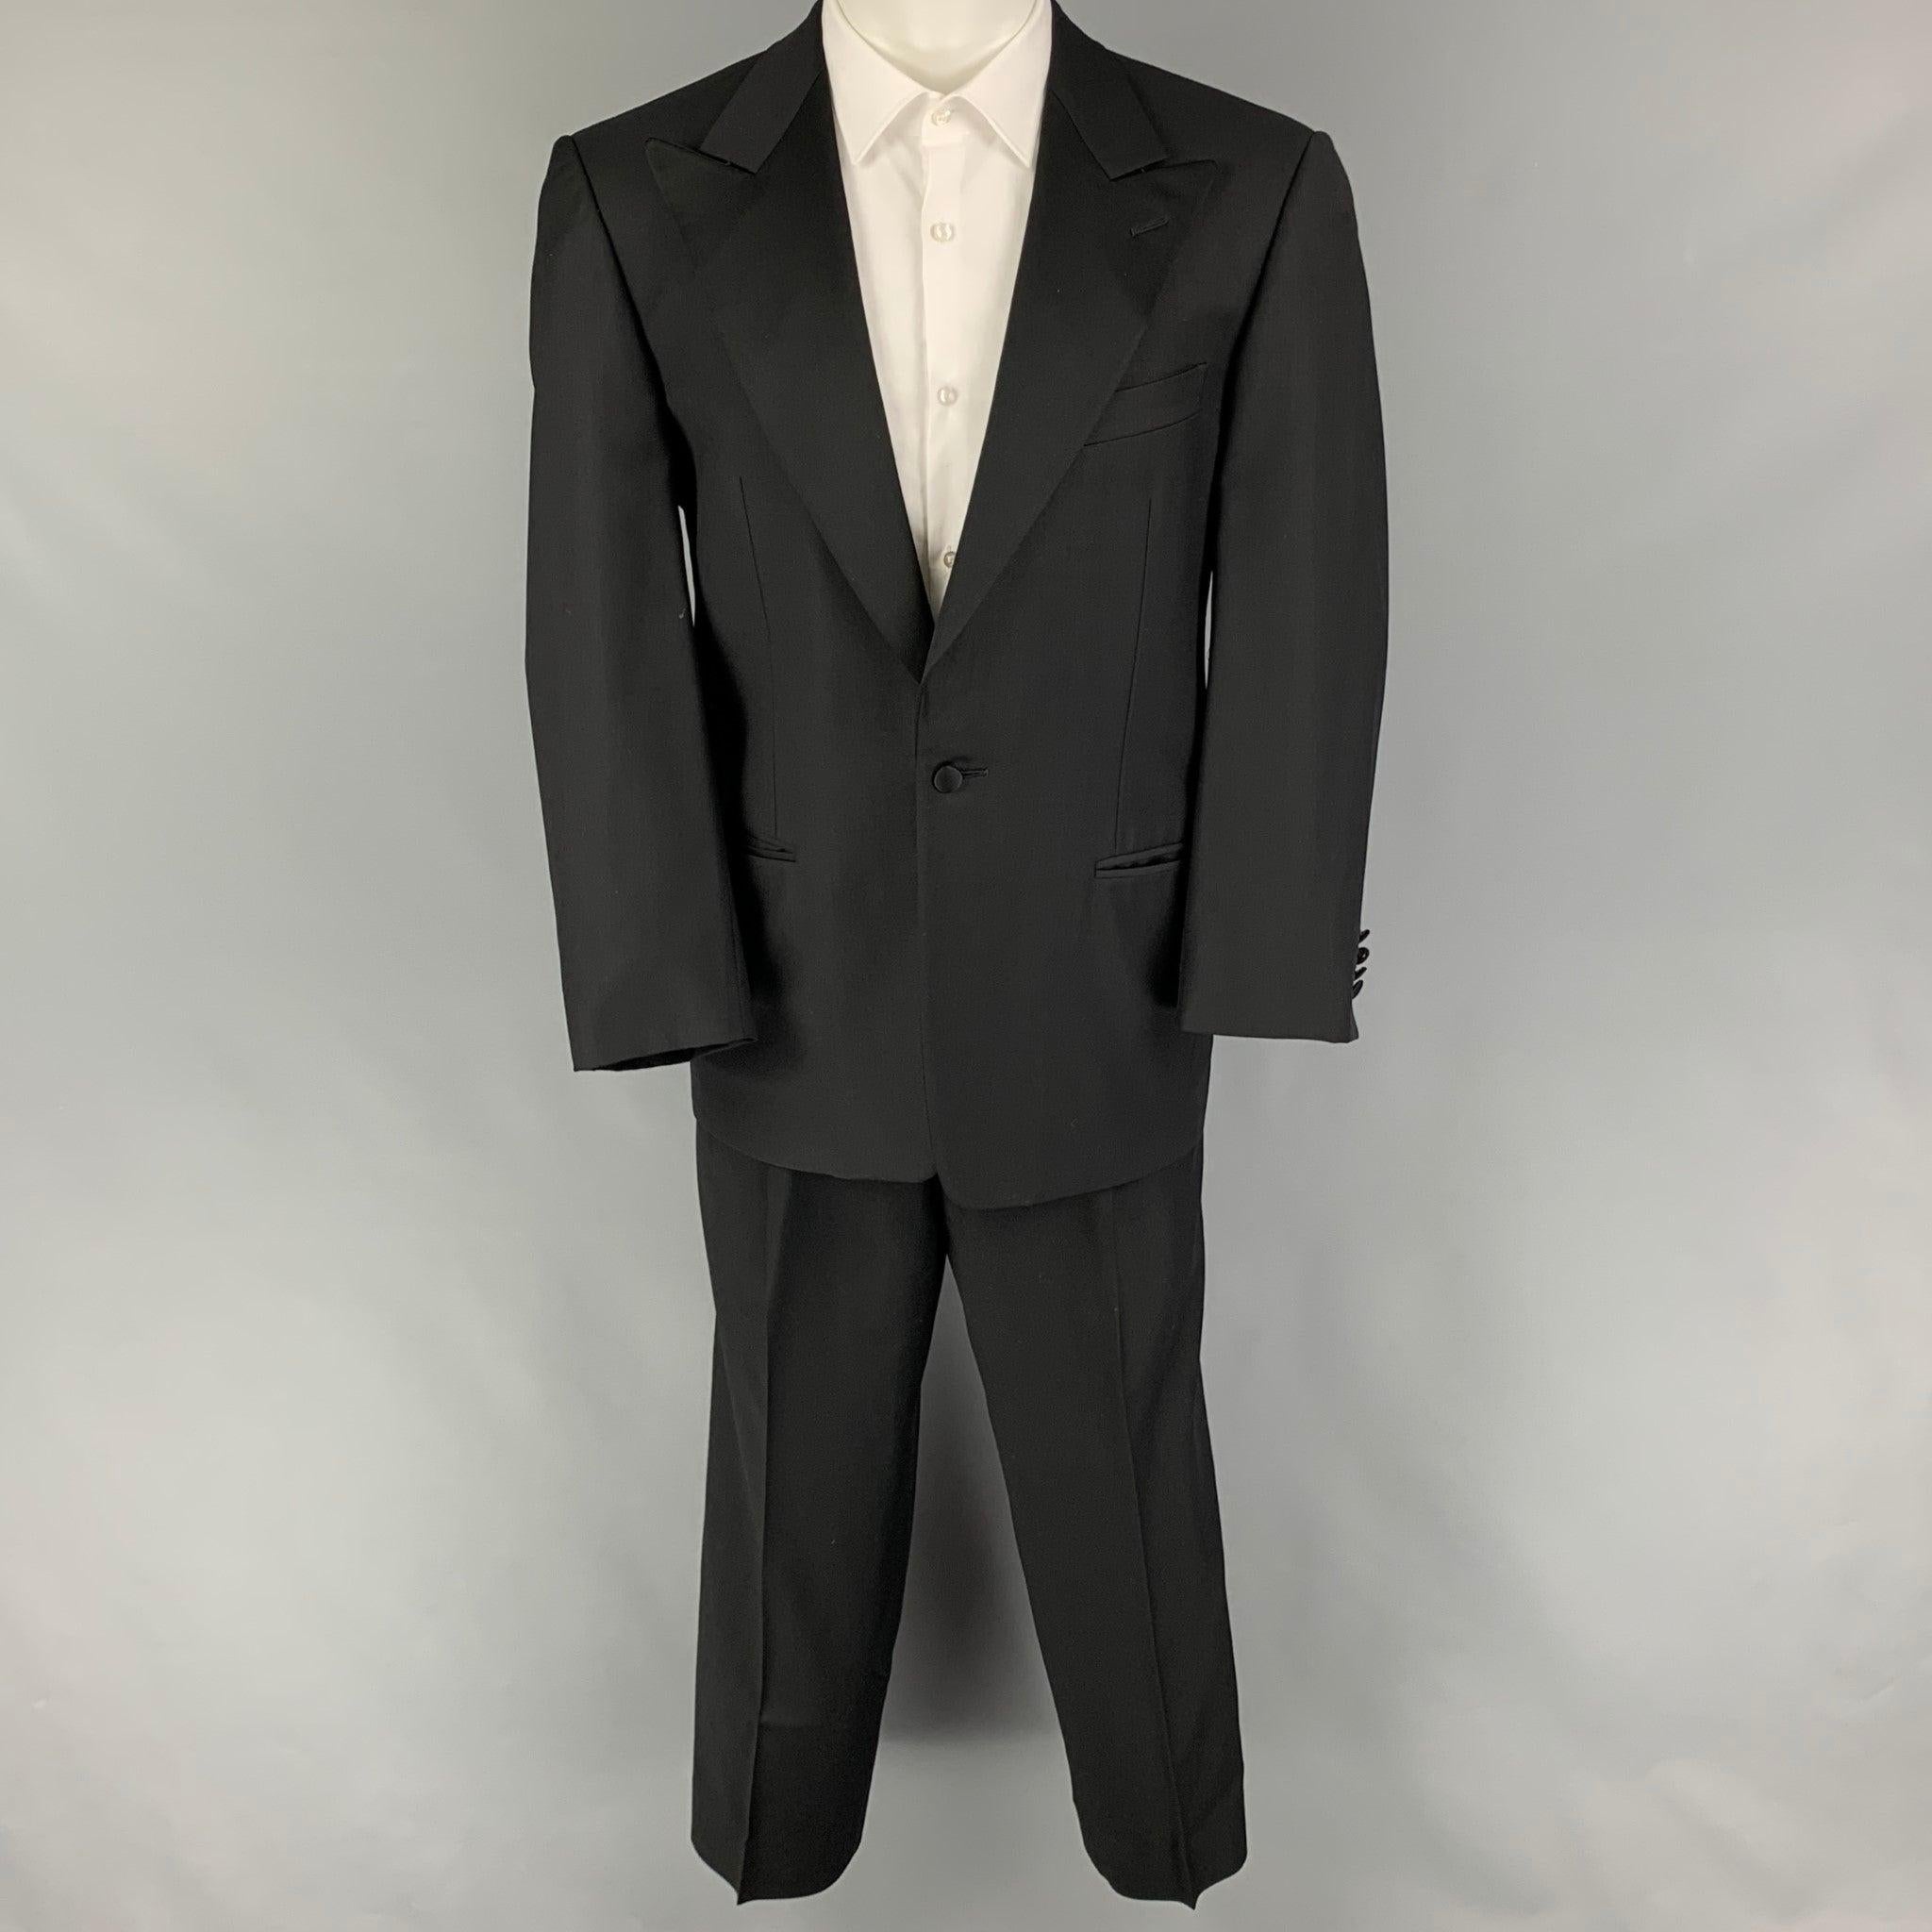 ERMENEGILDO ZEGNA for Neiman Marcus
suit comes in a black wool with a full liner and includes a single breasted, single button sport coat with a peak lapel and matching pleated front trousers. Good Pre-Owned Condition. 

Marked:   48 

Measurements: